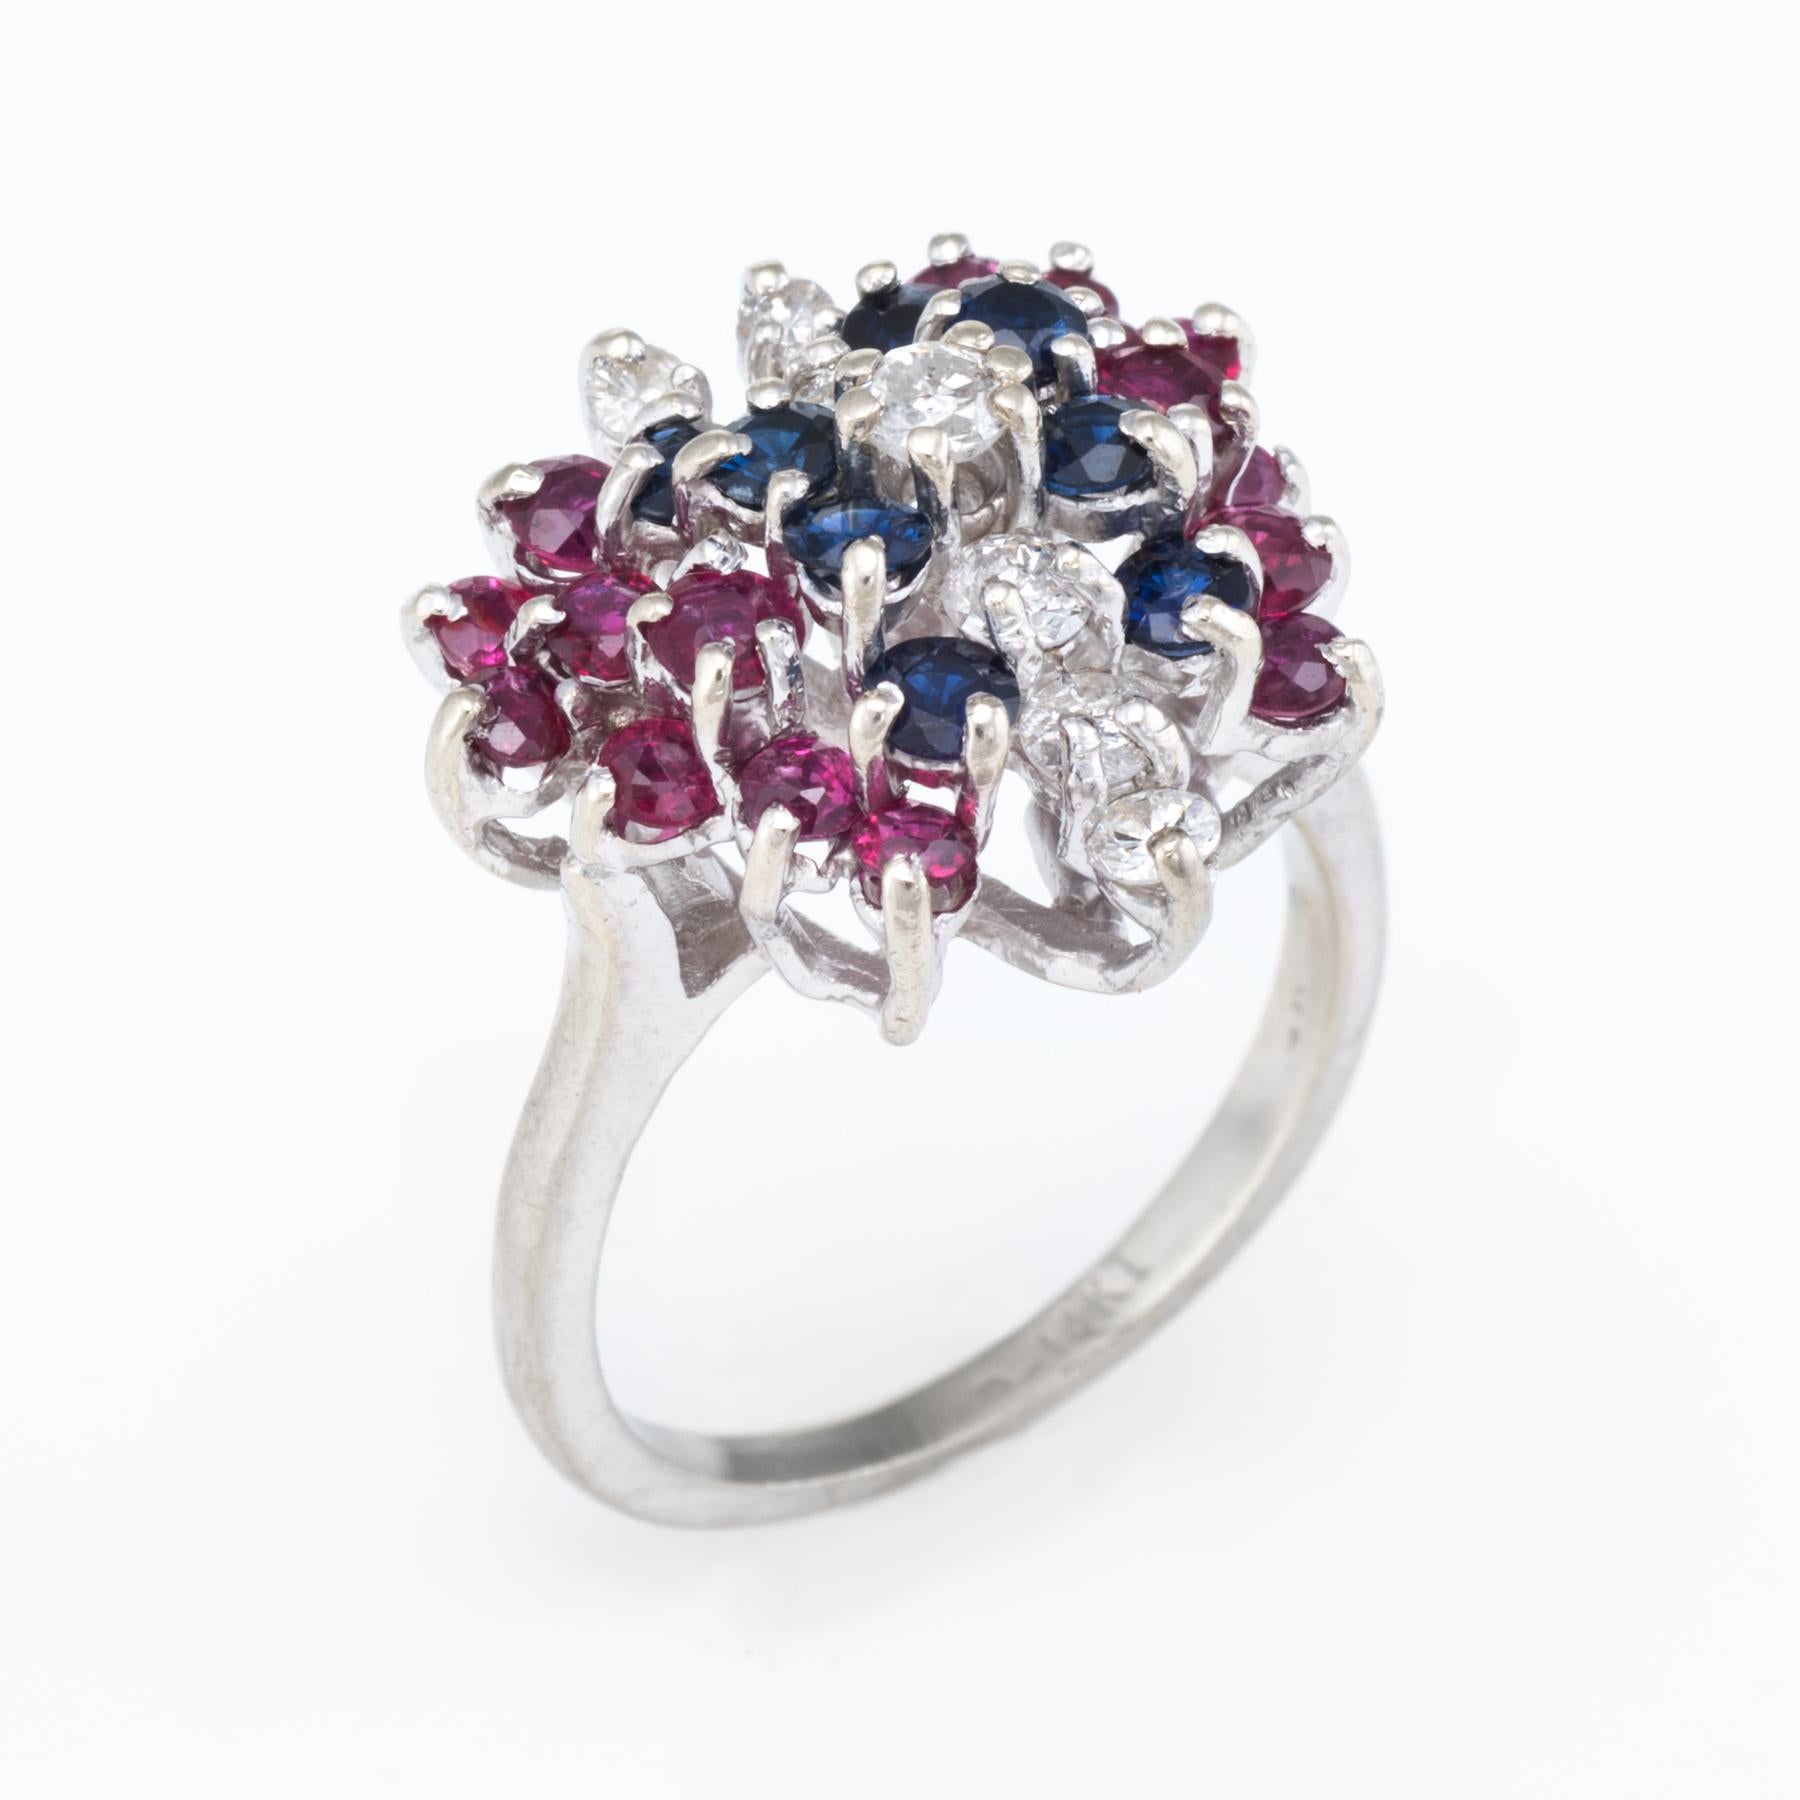 Finely detailed butterfly cocktail ring, crafted in 14 karat white gold. 

Round brilliant cut diamonds total an estimated 0.50 carats (estimated at I color and SI1-2 clarity), accented with an estimated 1 carat of rubies and 1/2 carats of